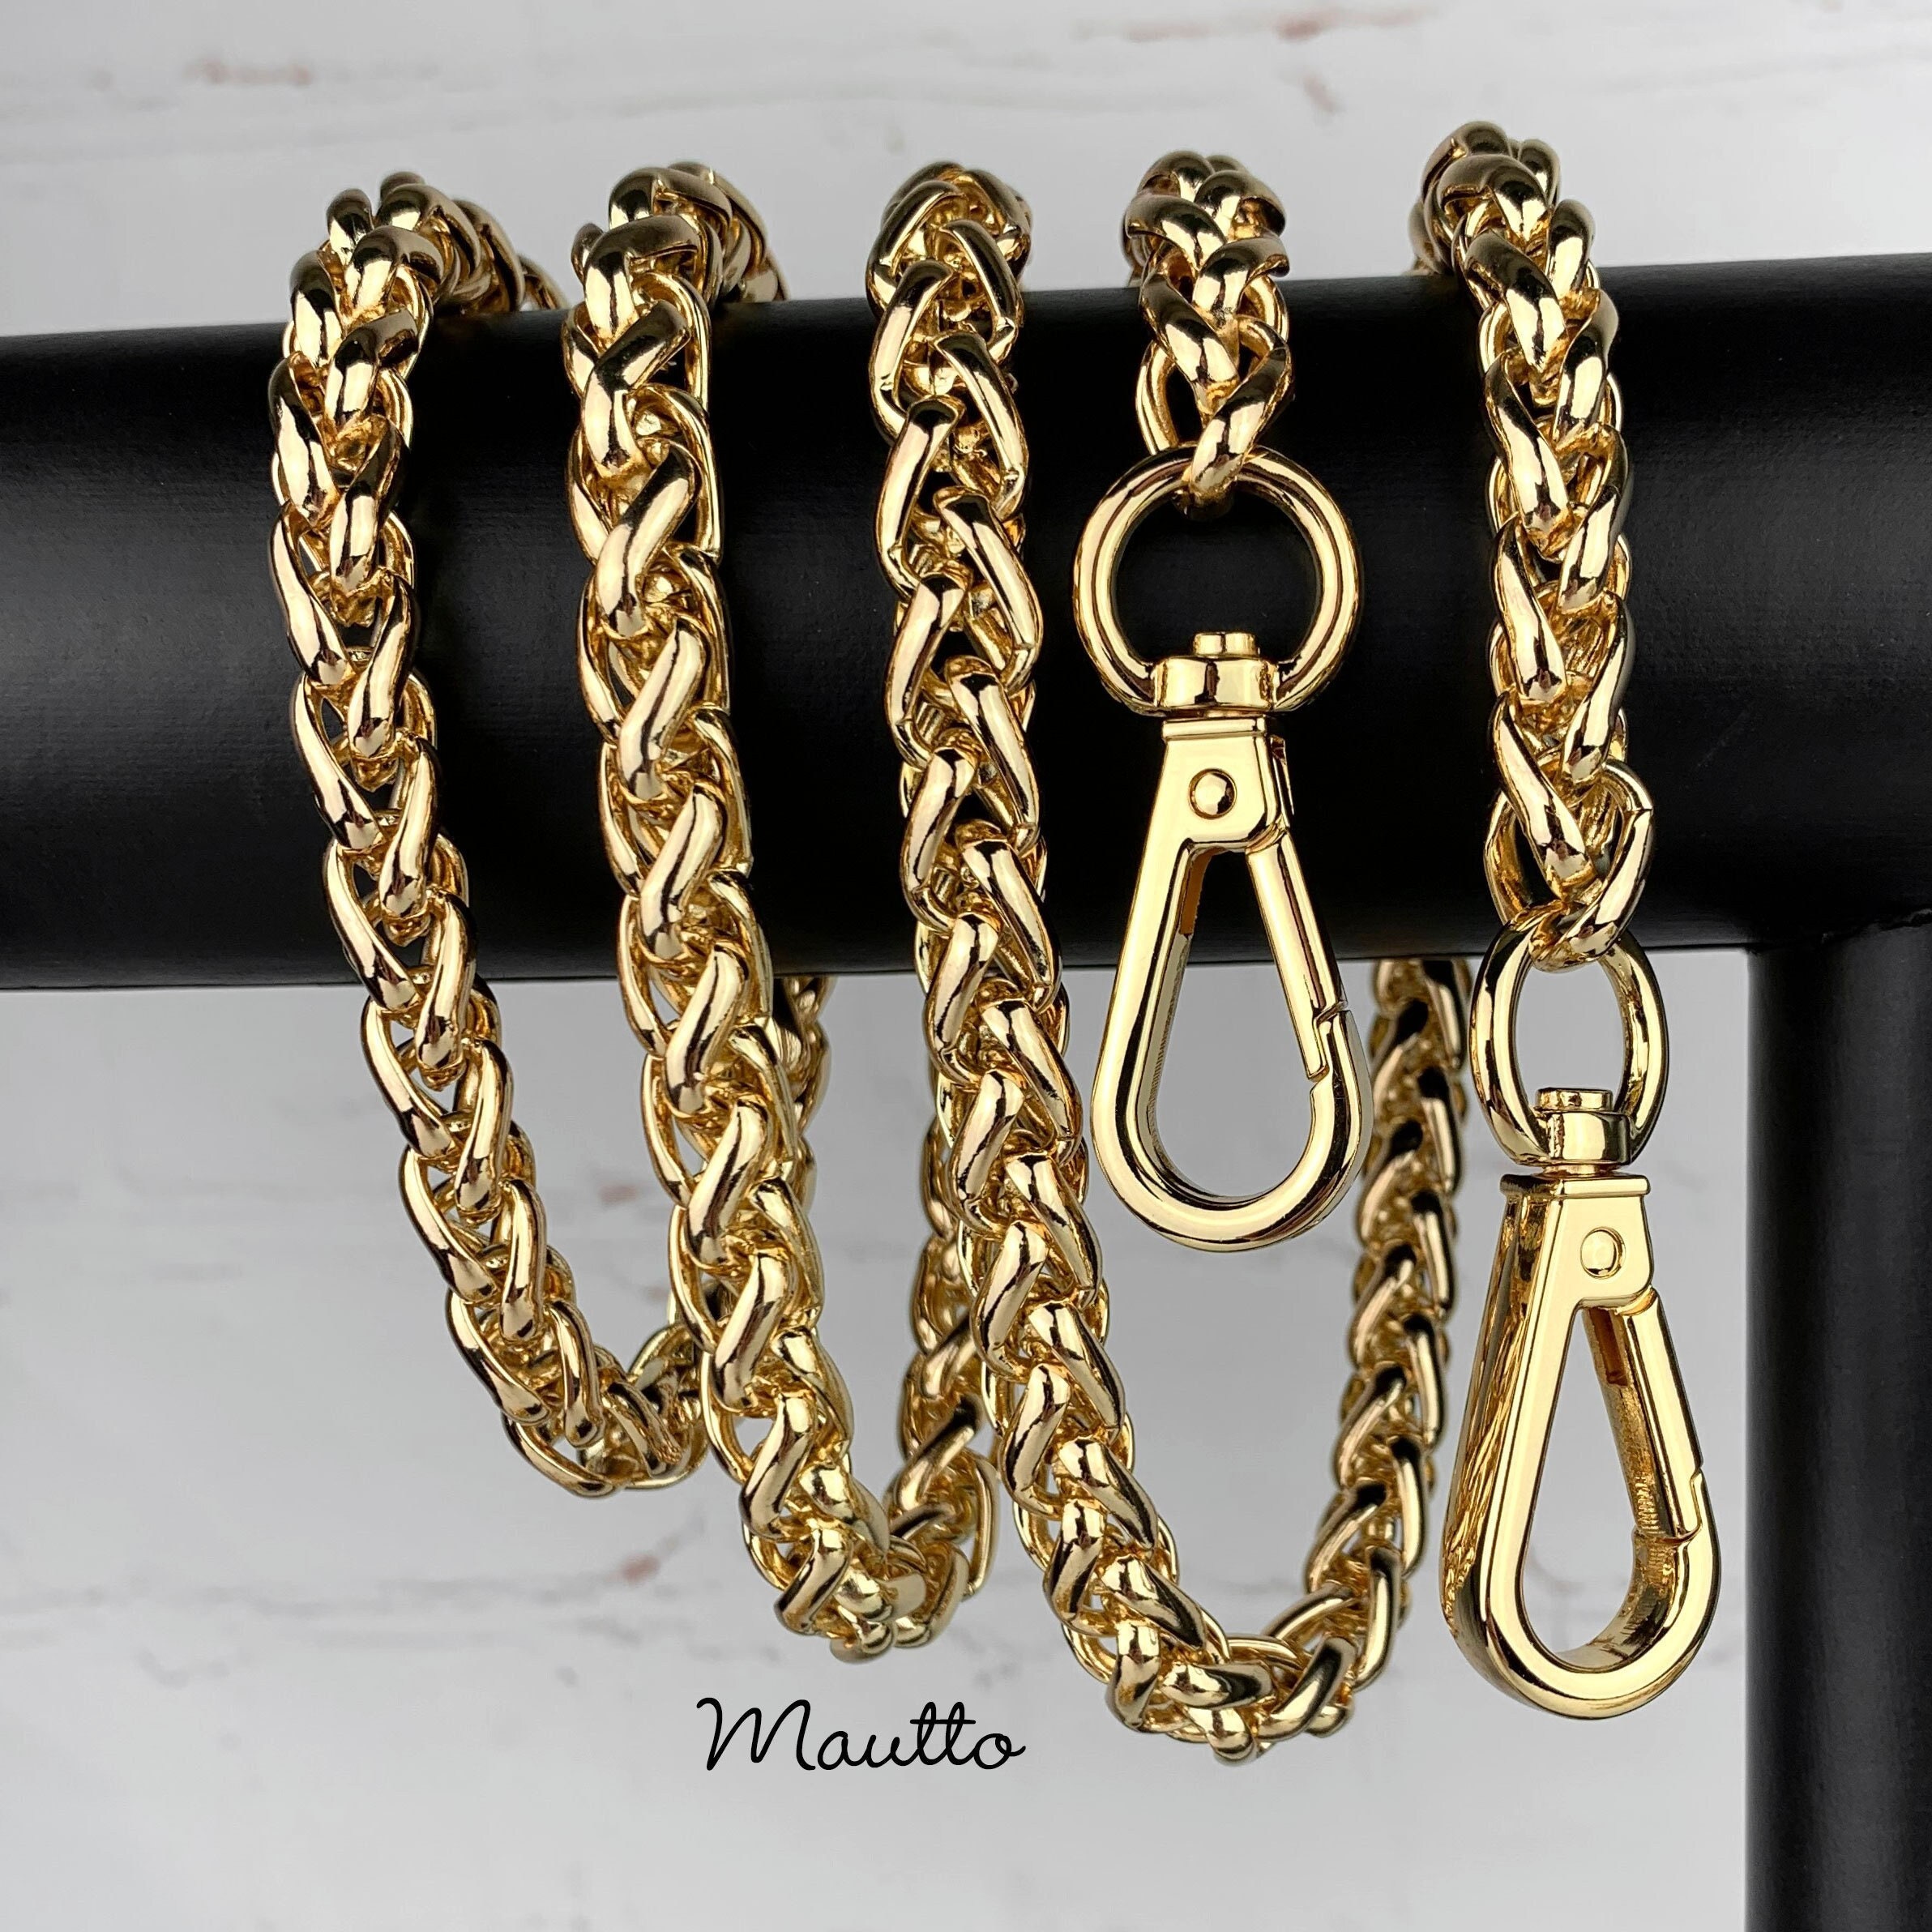 Large Braided Chain Strap Wheat-style Links Design GOLD 